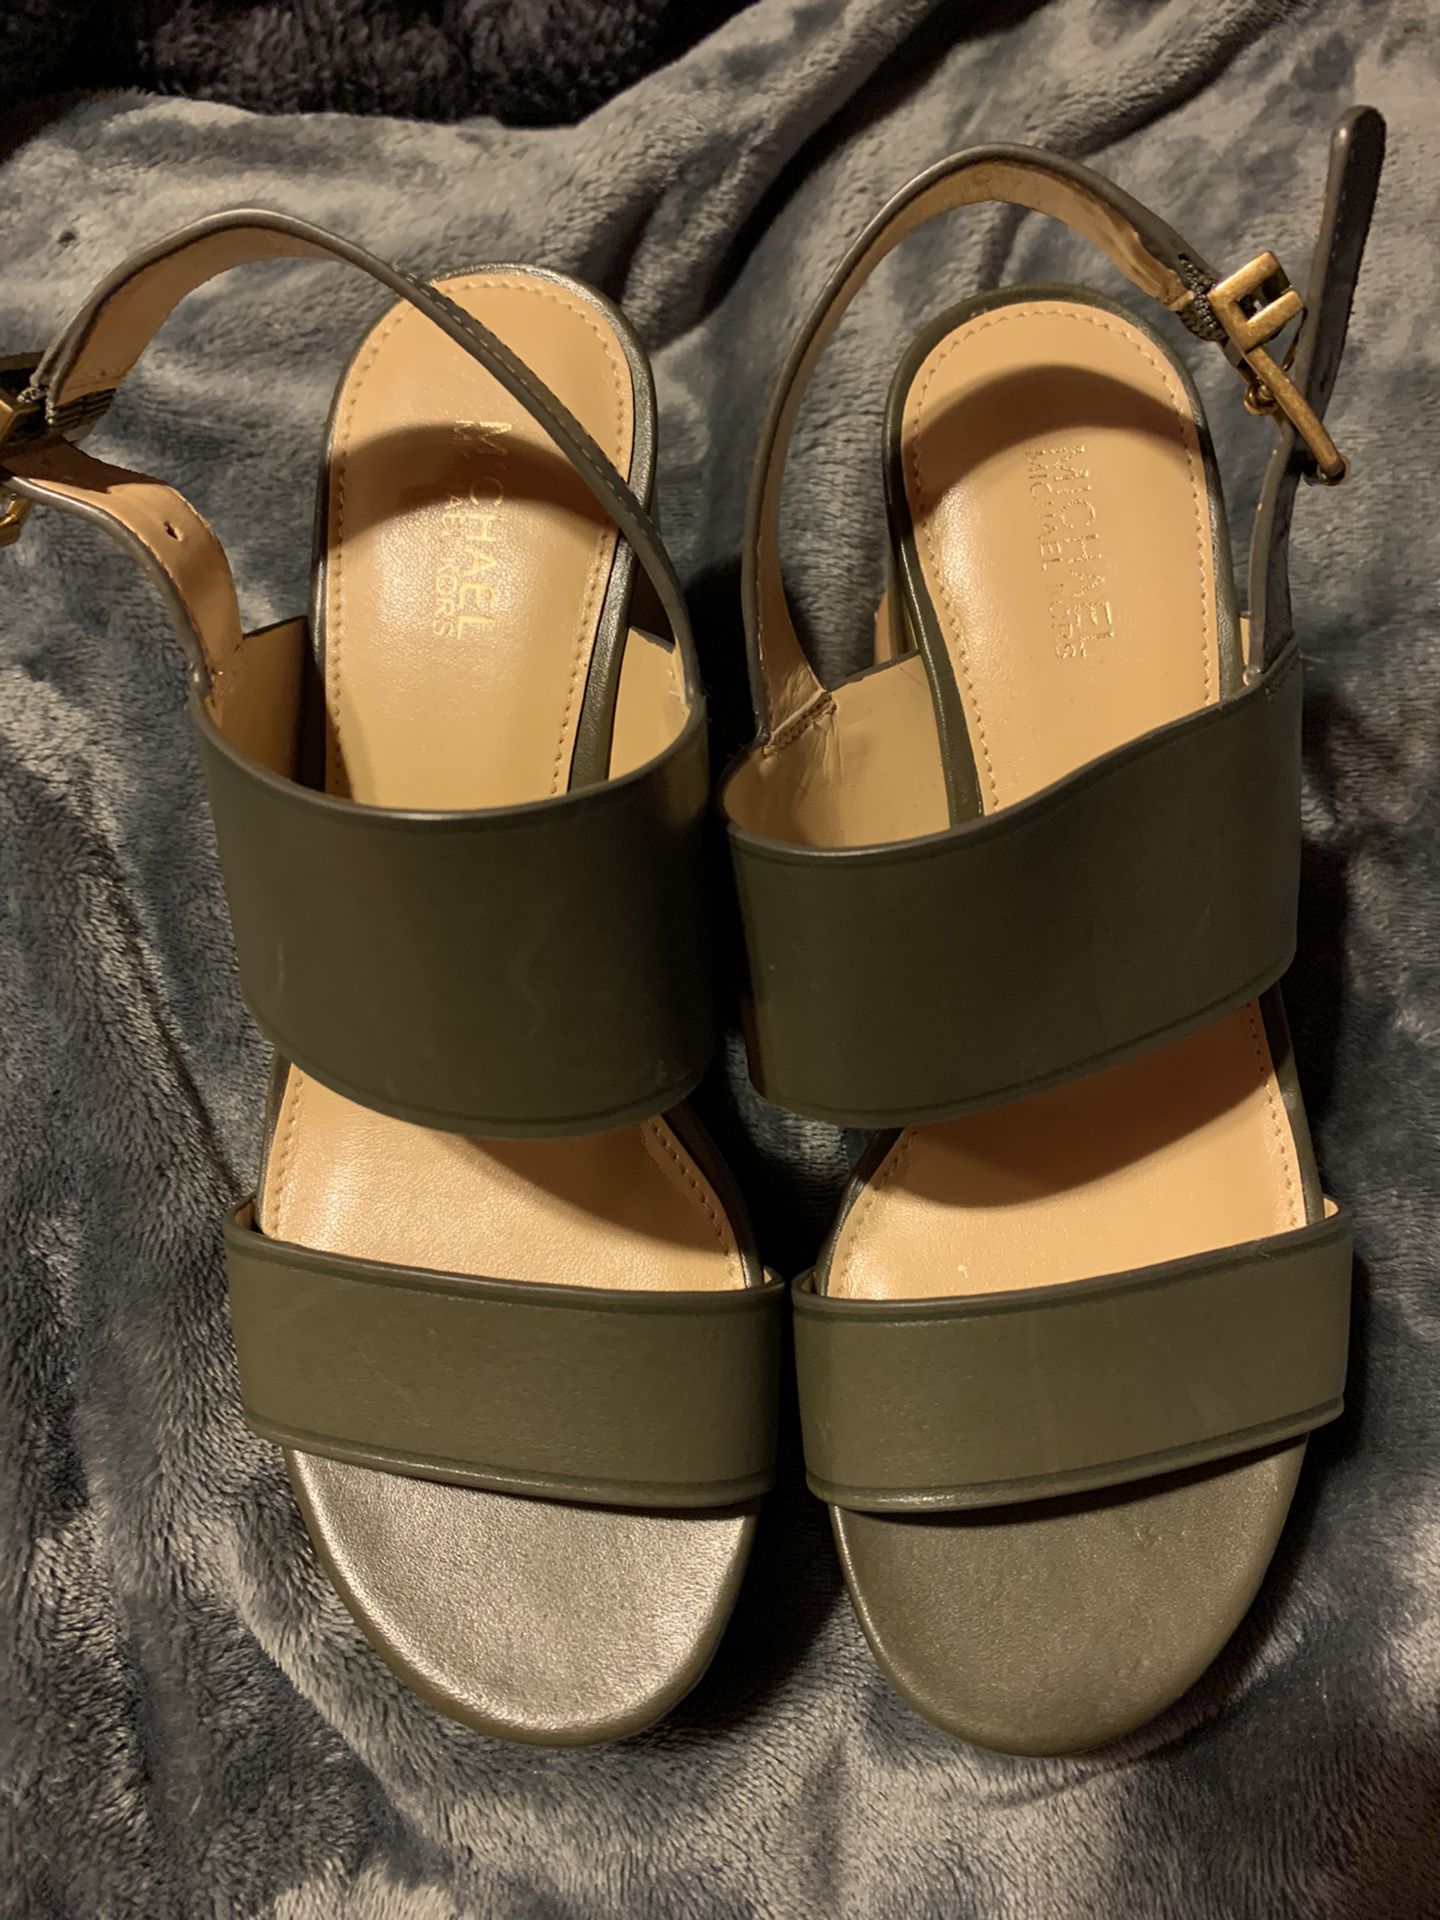 Michael Kors Green Wedges Size 5 for Sale in Chula Vista, CA - OfferUp